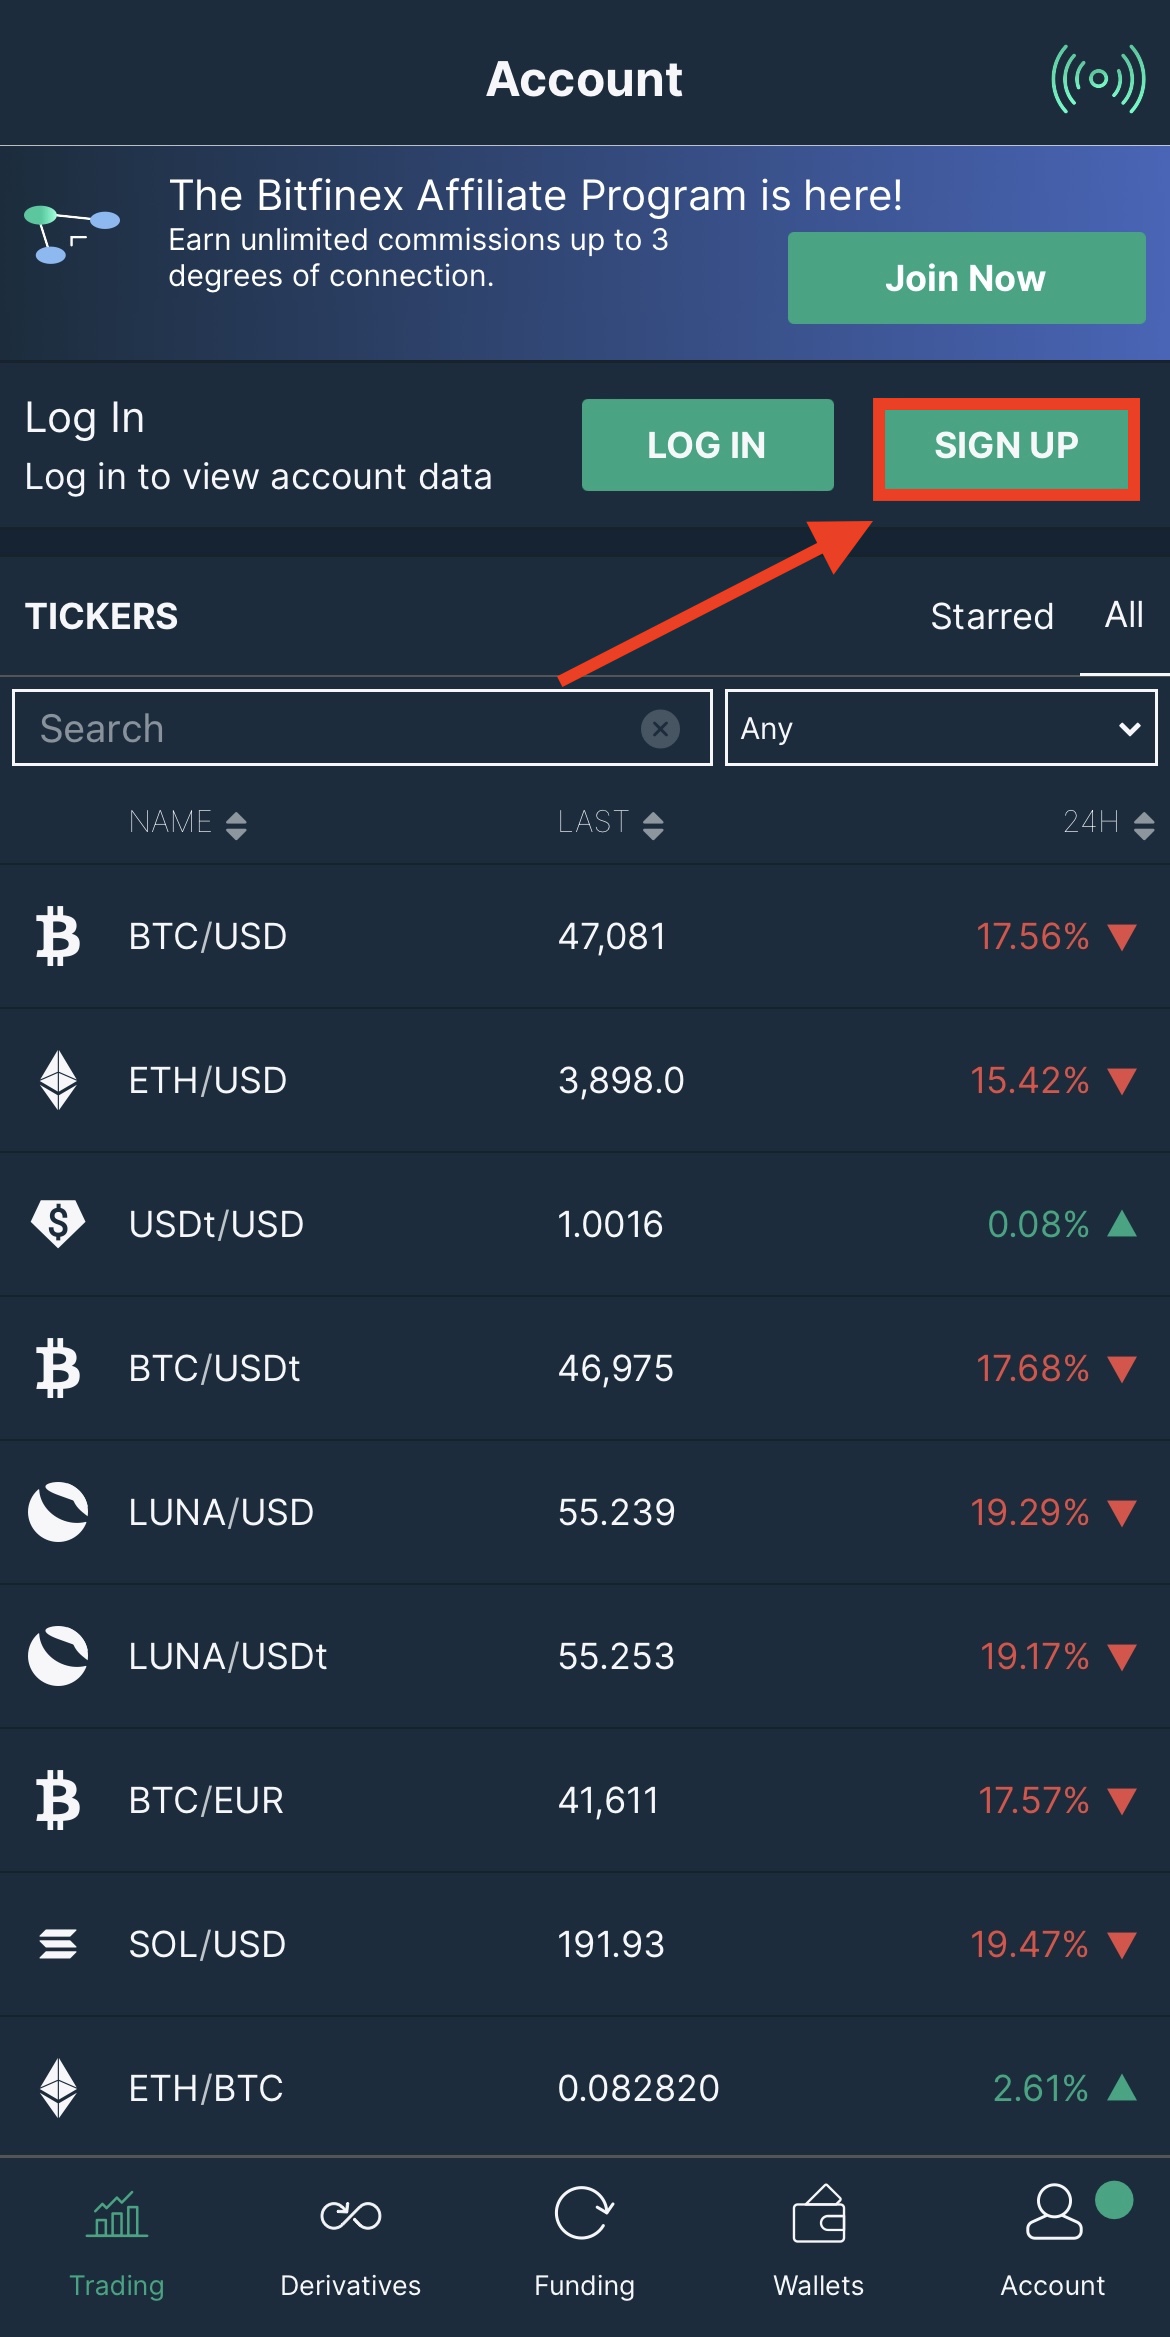 How_to_Sign_Up_from_the_Bitfinex_Mobile_App1.jpg